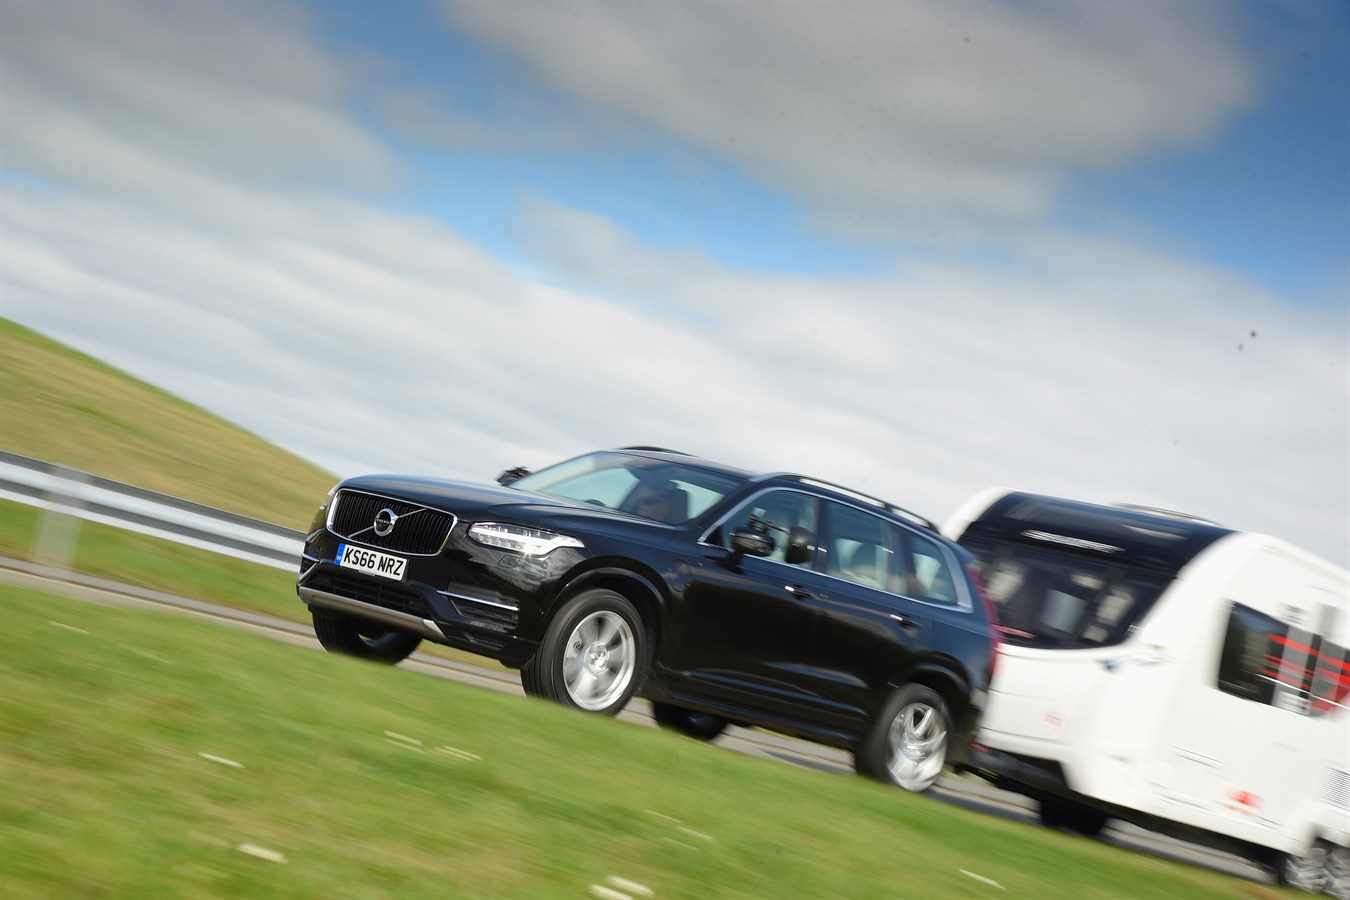 Volvo XC90 T8 voted ‘Best Hybrid’ at Tow Car Awards 2017